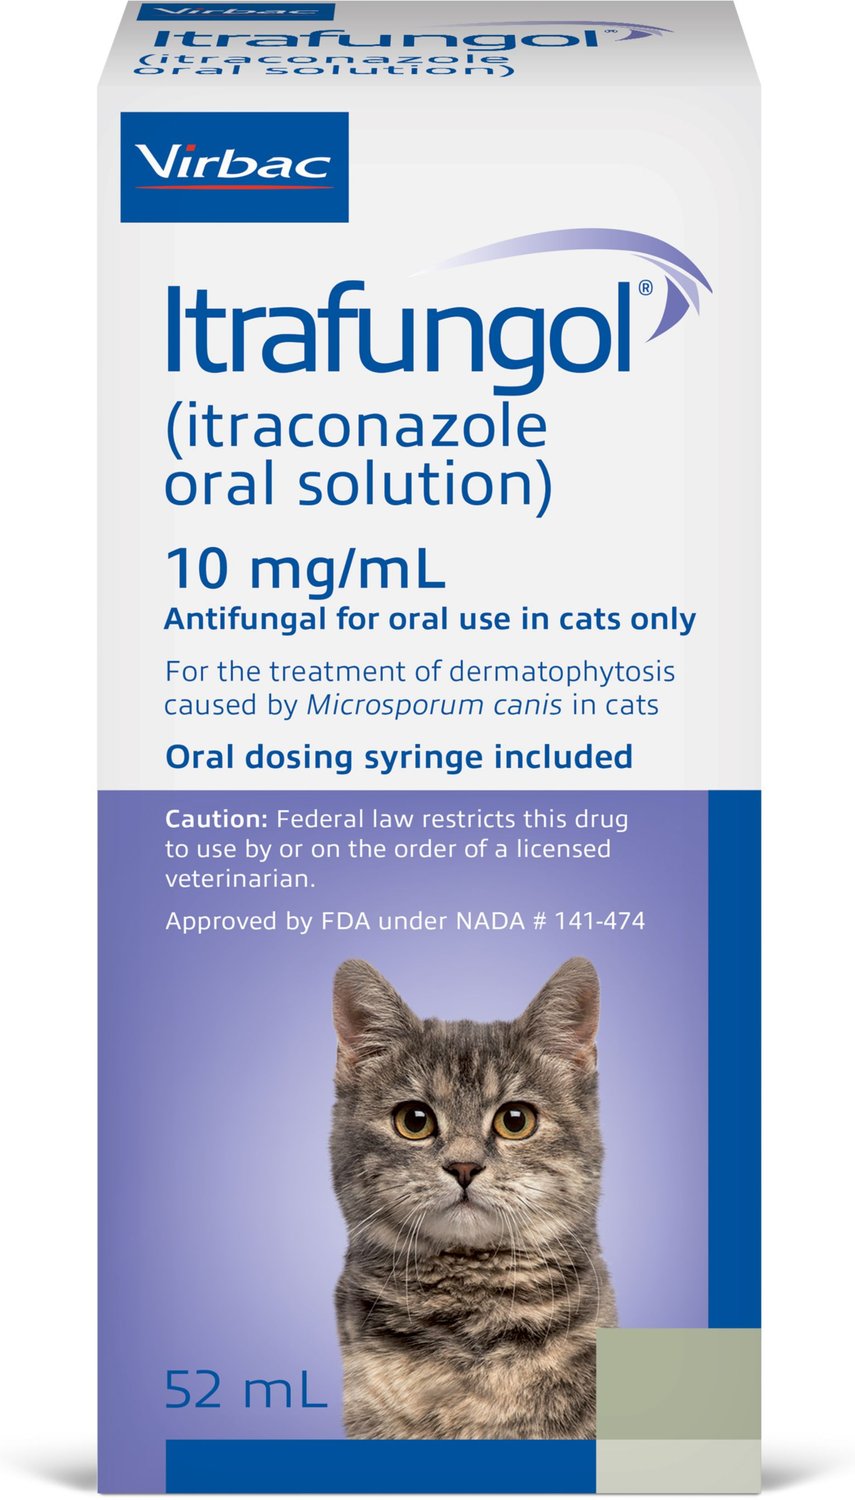 Ringworm Medication For Cats